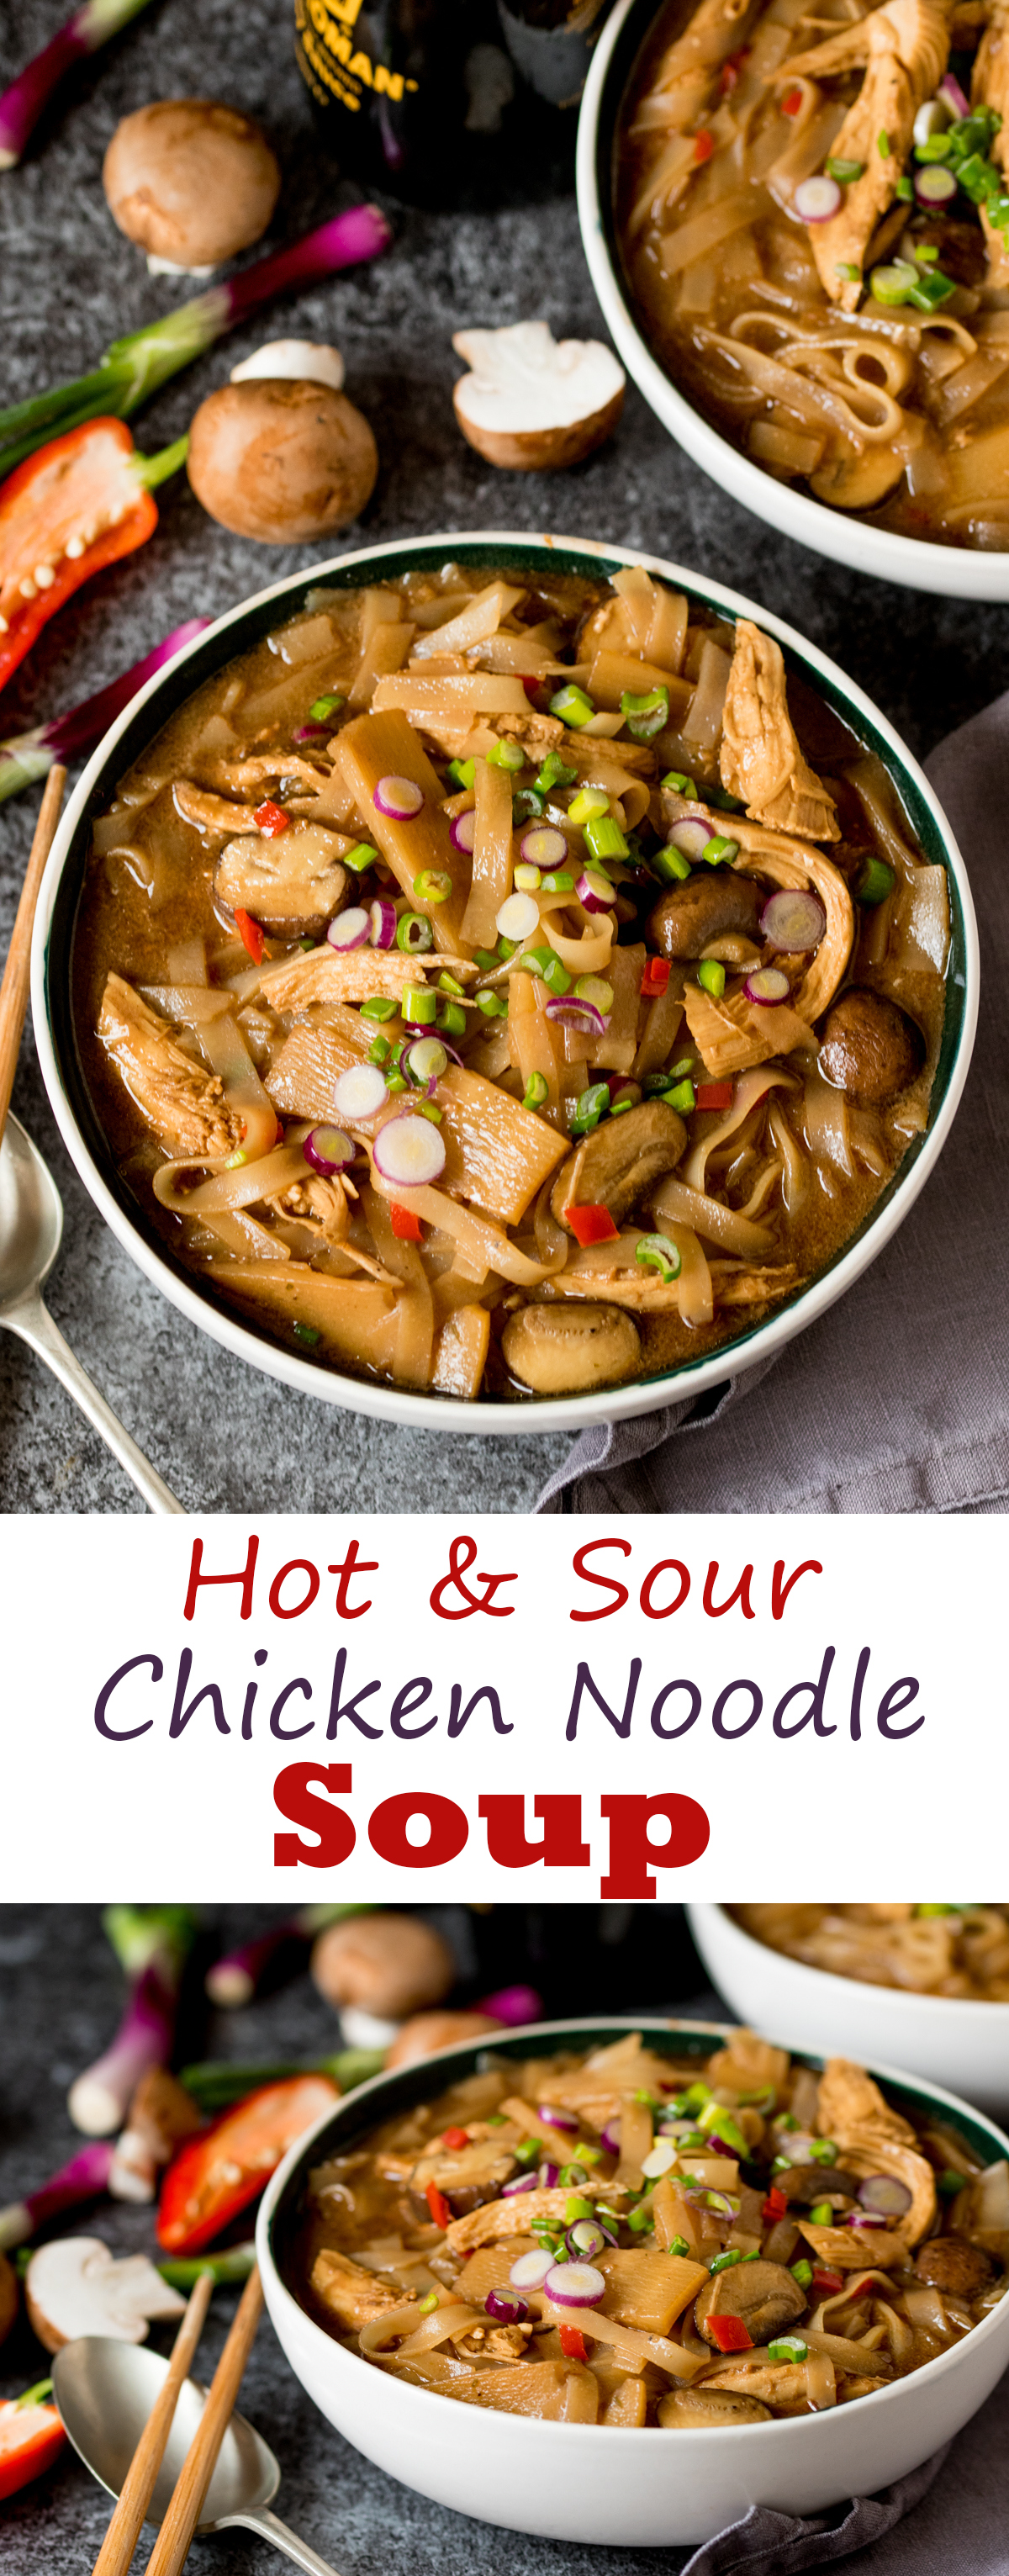 This filling Hot and Sour Chicken Noodle Soup will make your taste buds tingle!